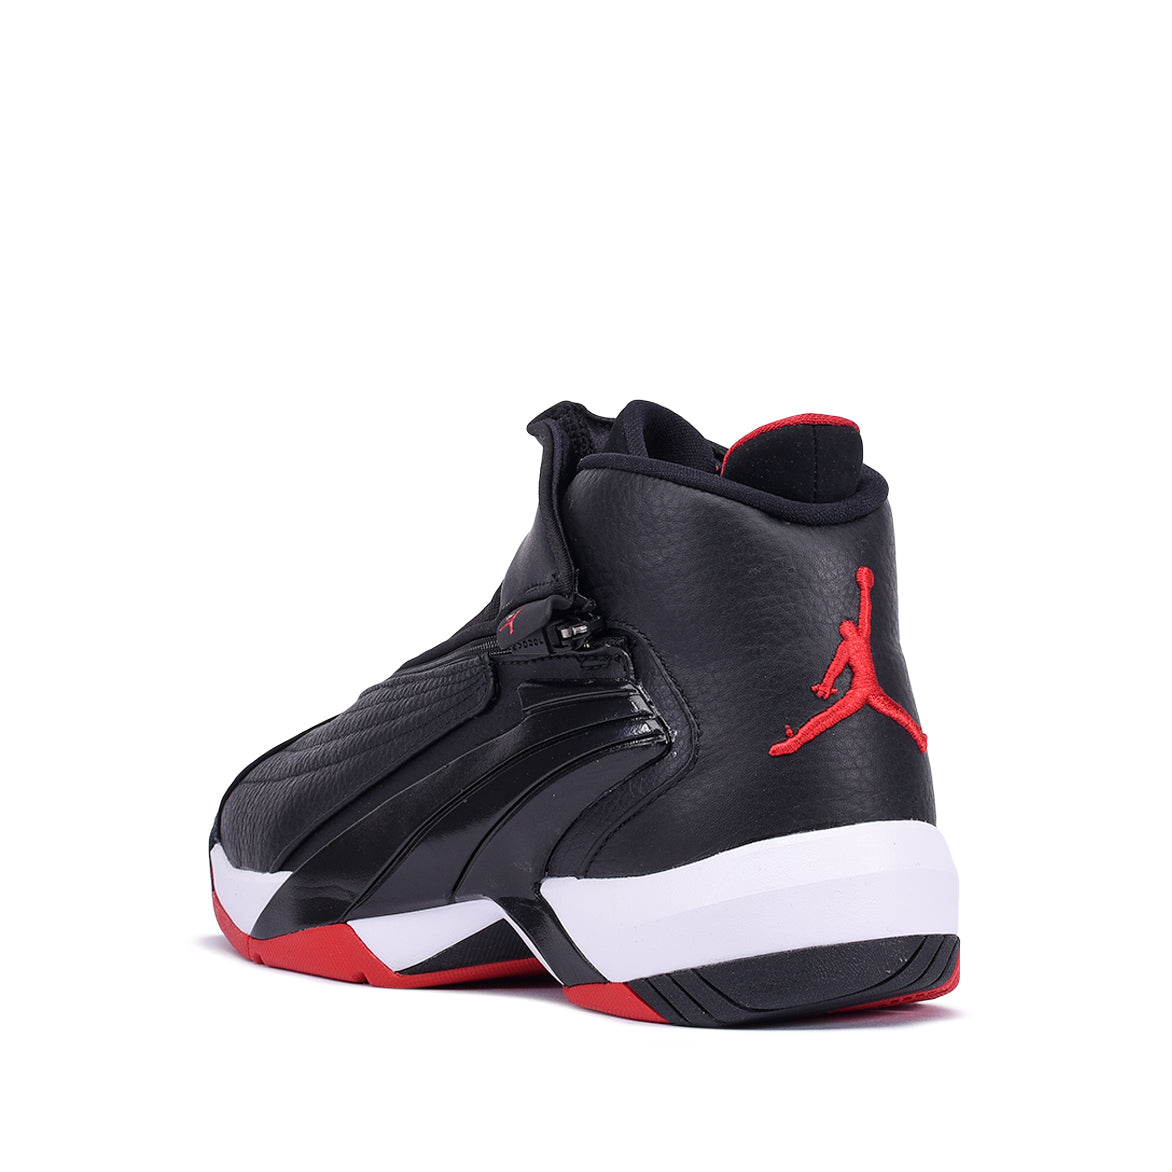 jumpman red and black